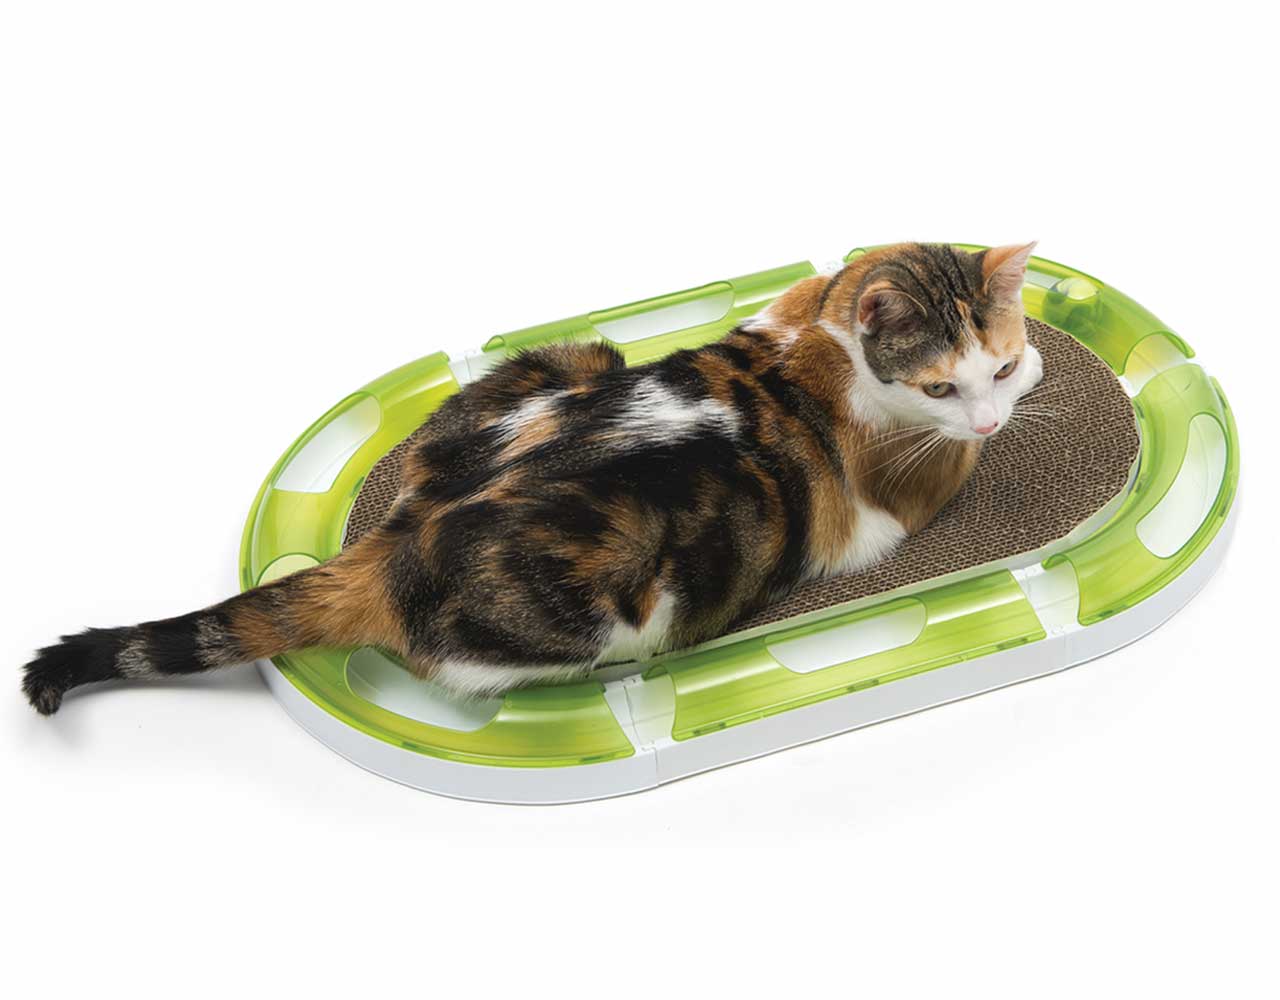 Corrugated cardboard scratcher with large surface for lounging